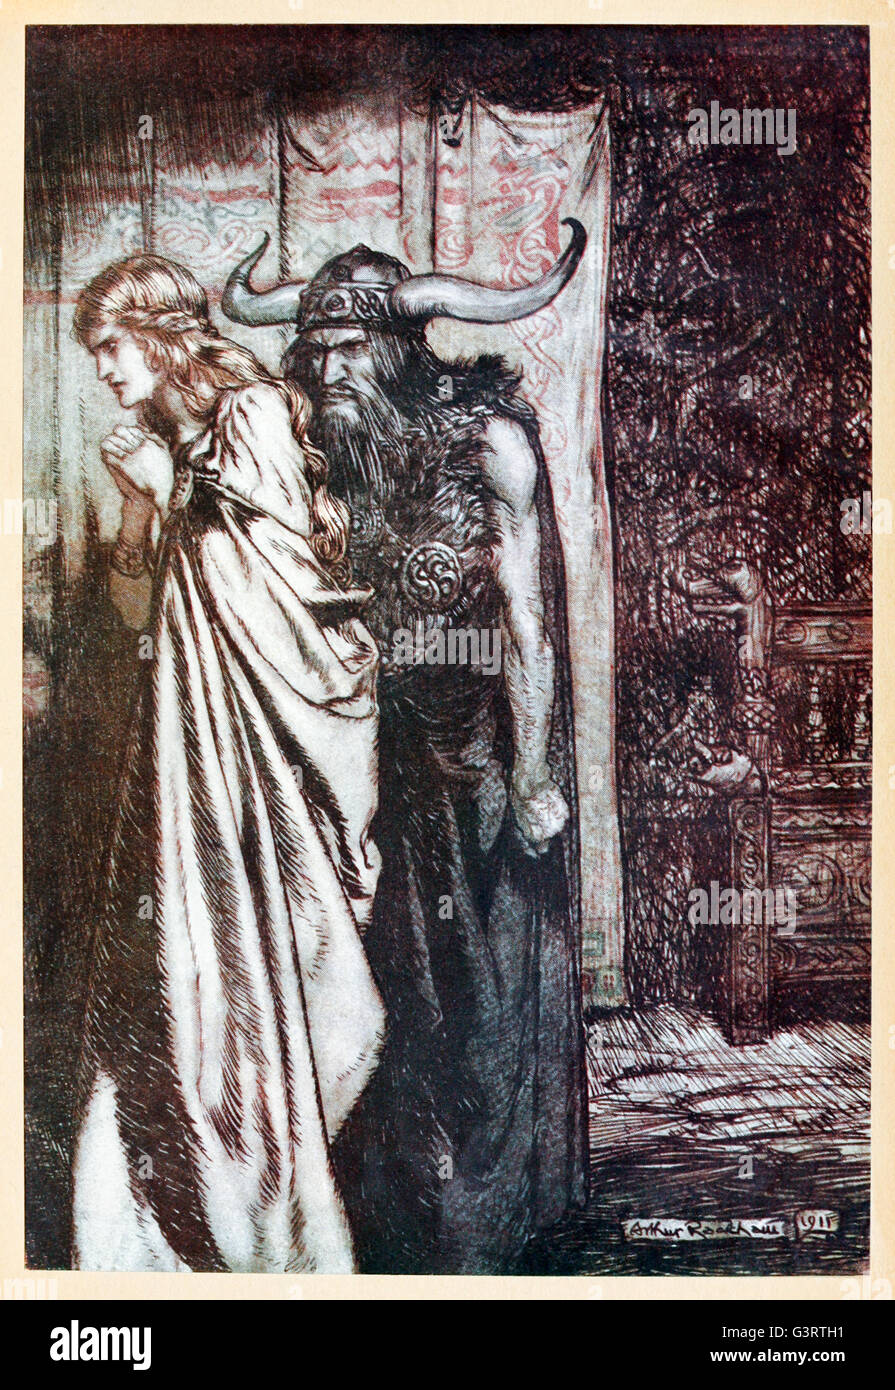 “O wife betrayed, I will avenge Thy trust deceived”” from 'Siegfried & The Twilight of the Gods' illustrated by Arthur Rackham (1867-1939). See description for more information. Stock Photo